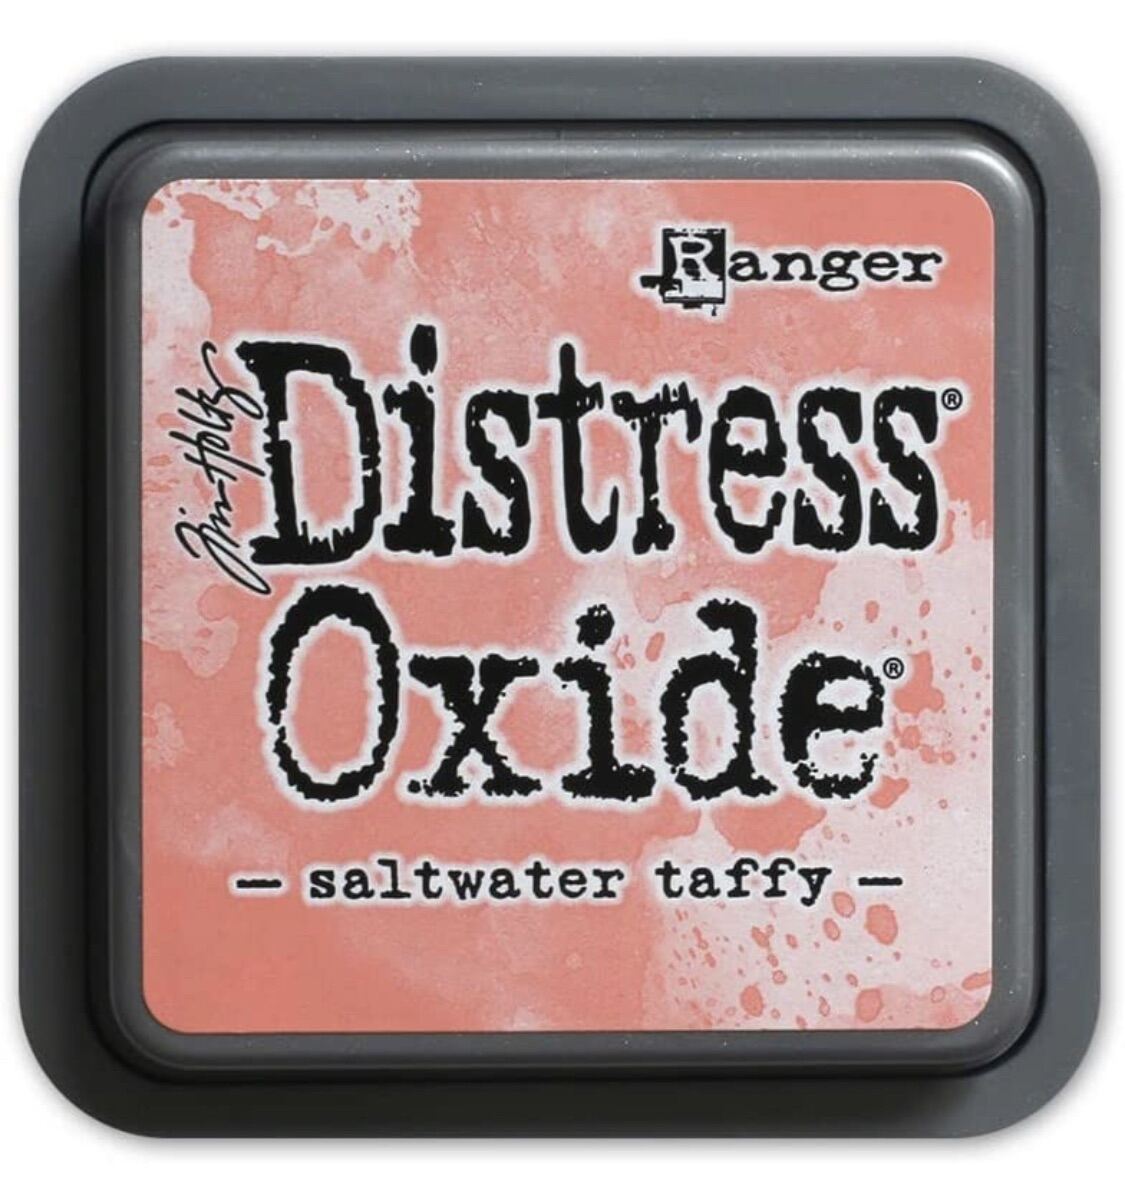 Tim Holtz Distress Crayons old color water soluble pastel set hand